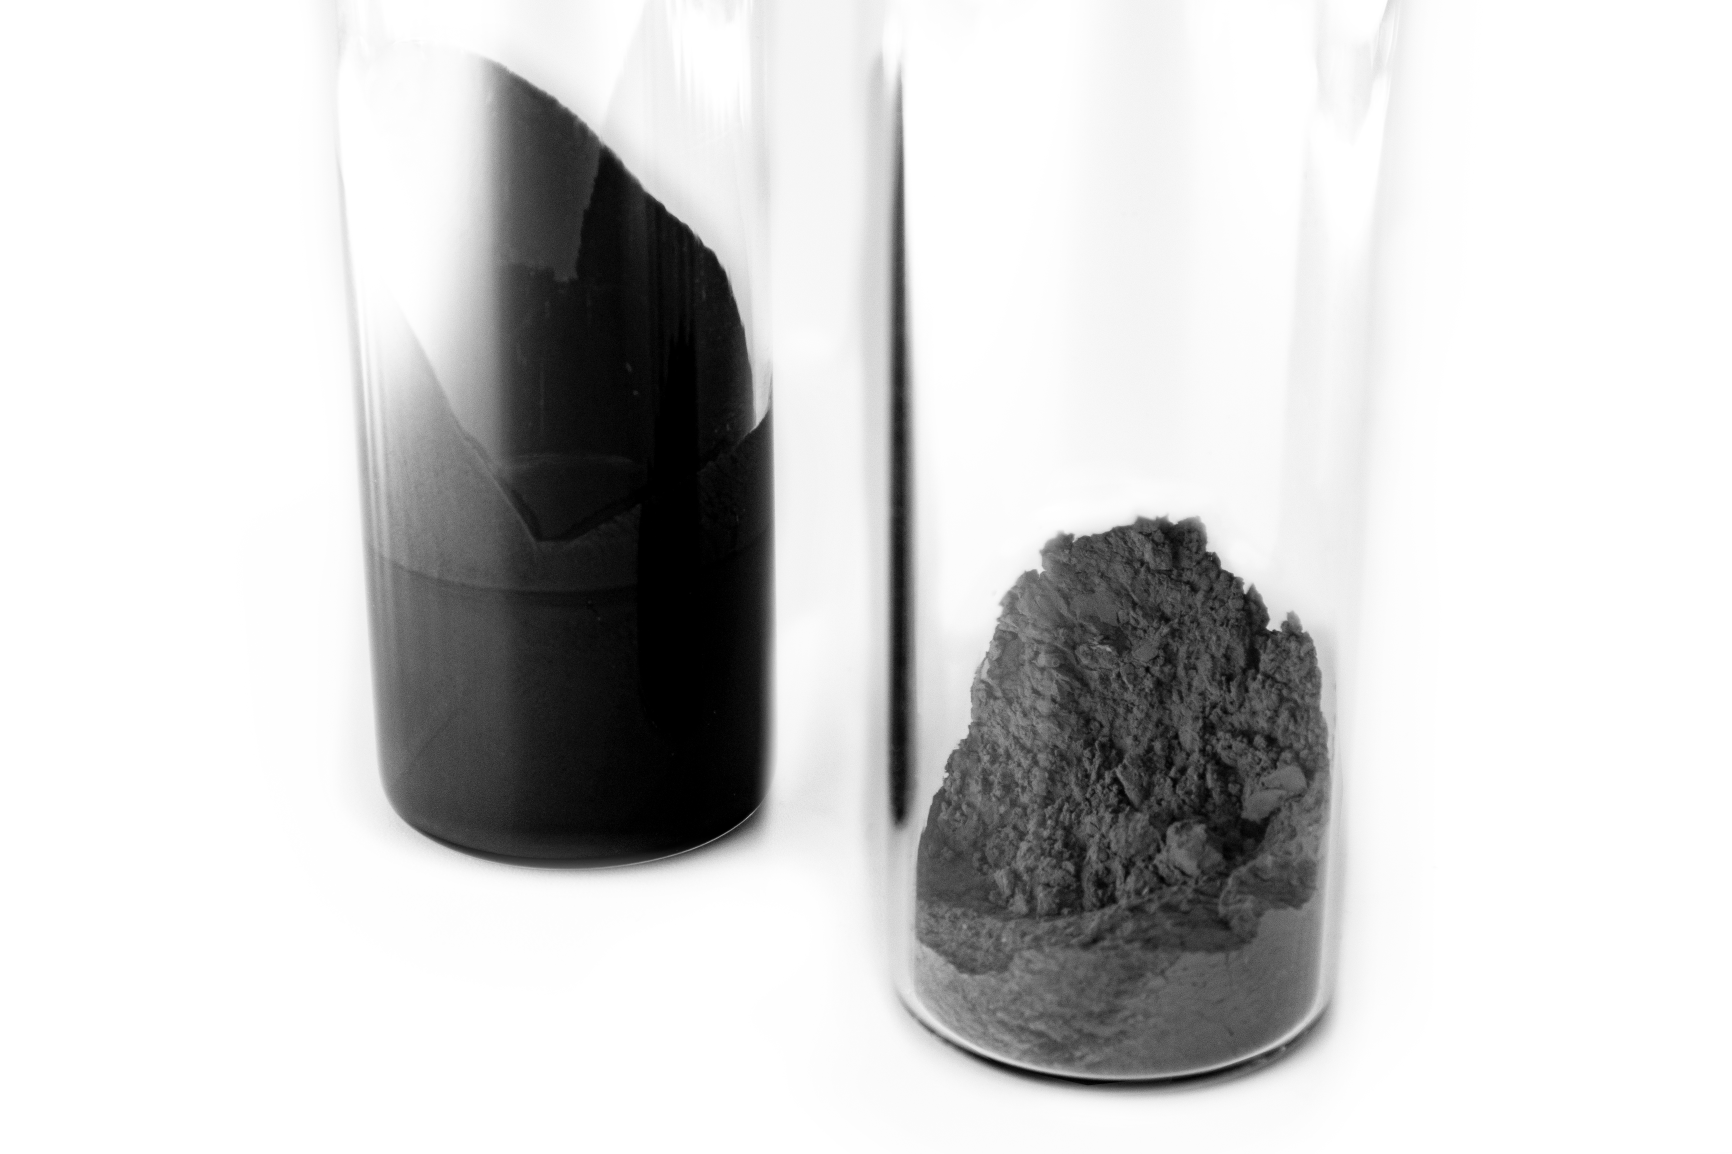 Both MR (magnetorheological) fluid and powder in a glass cylinder in their unlinked (liquid/powdered) state.